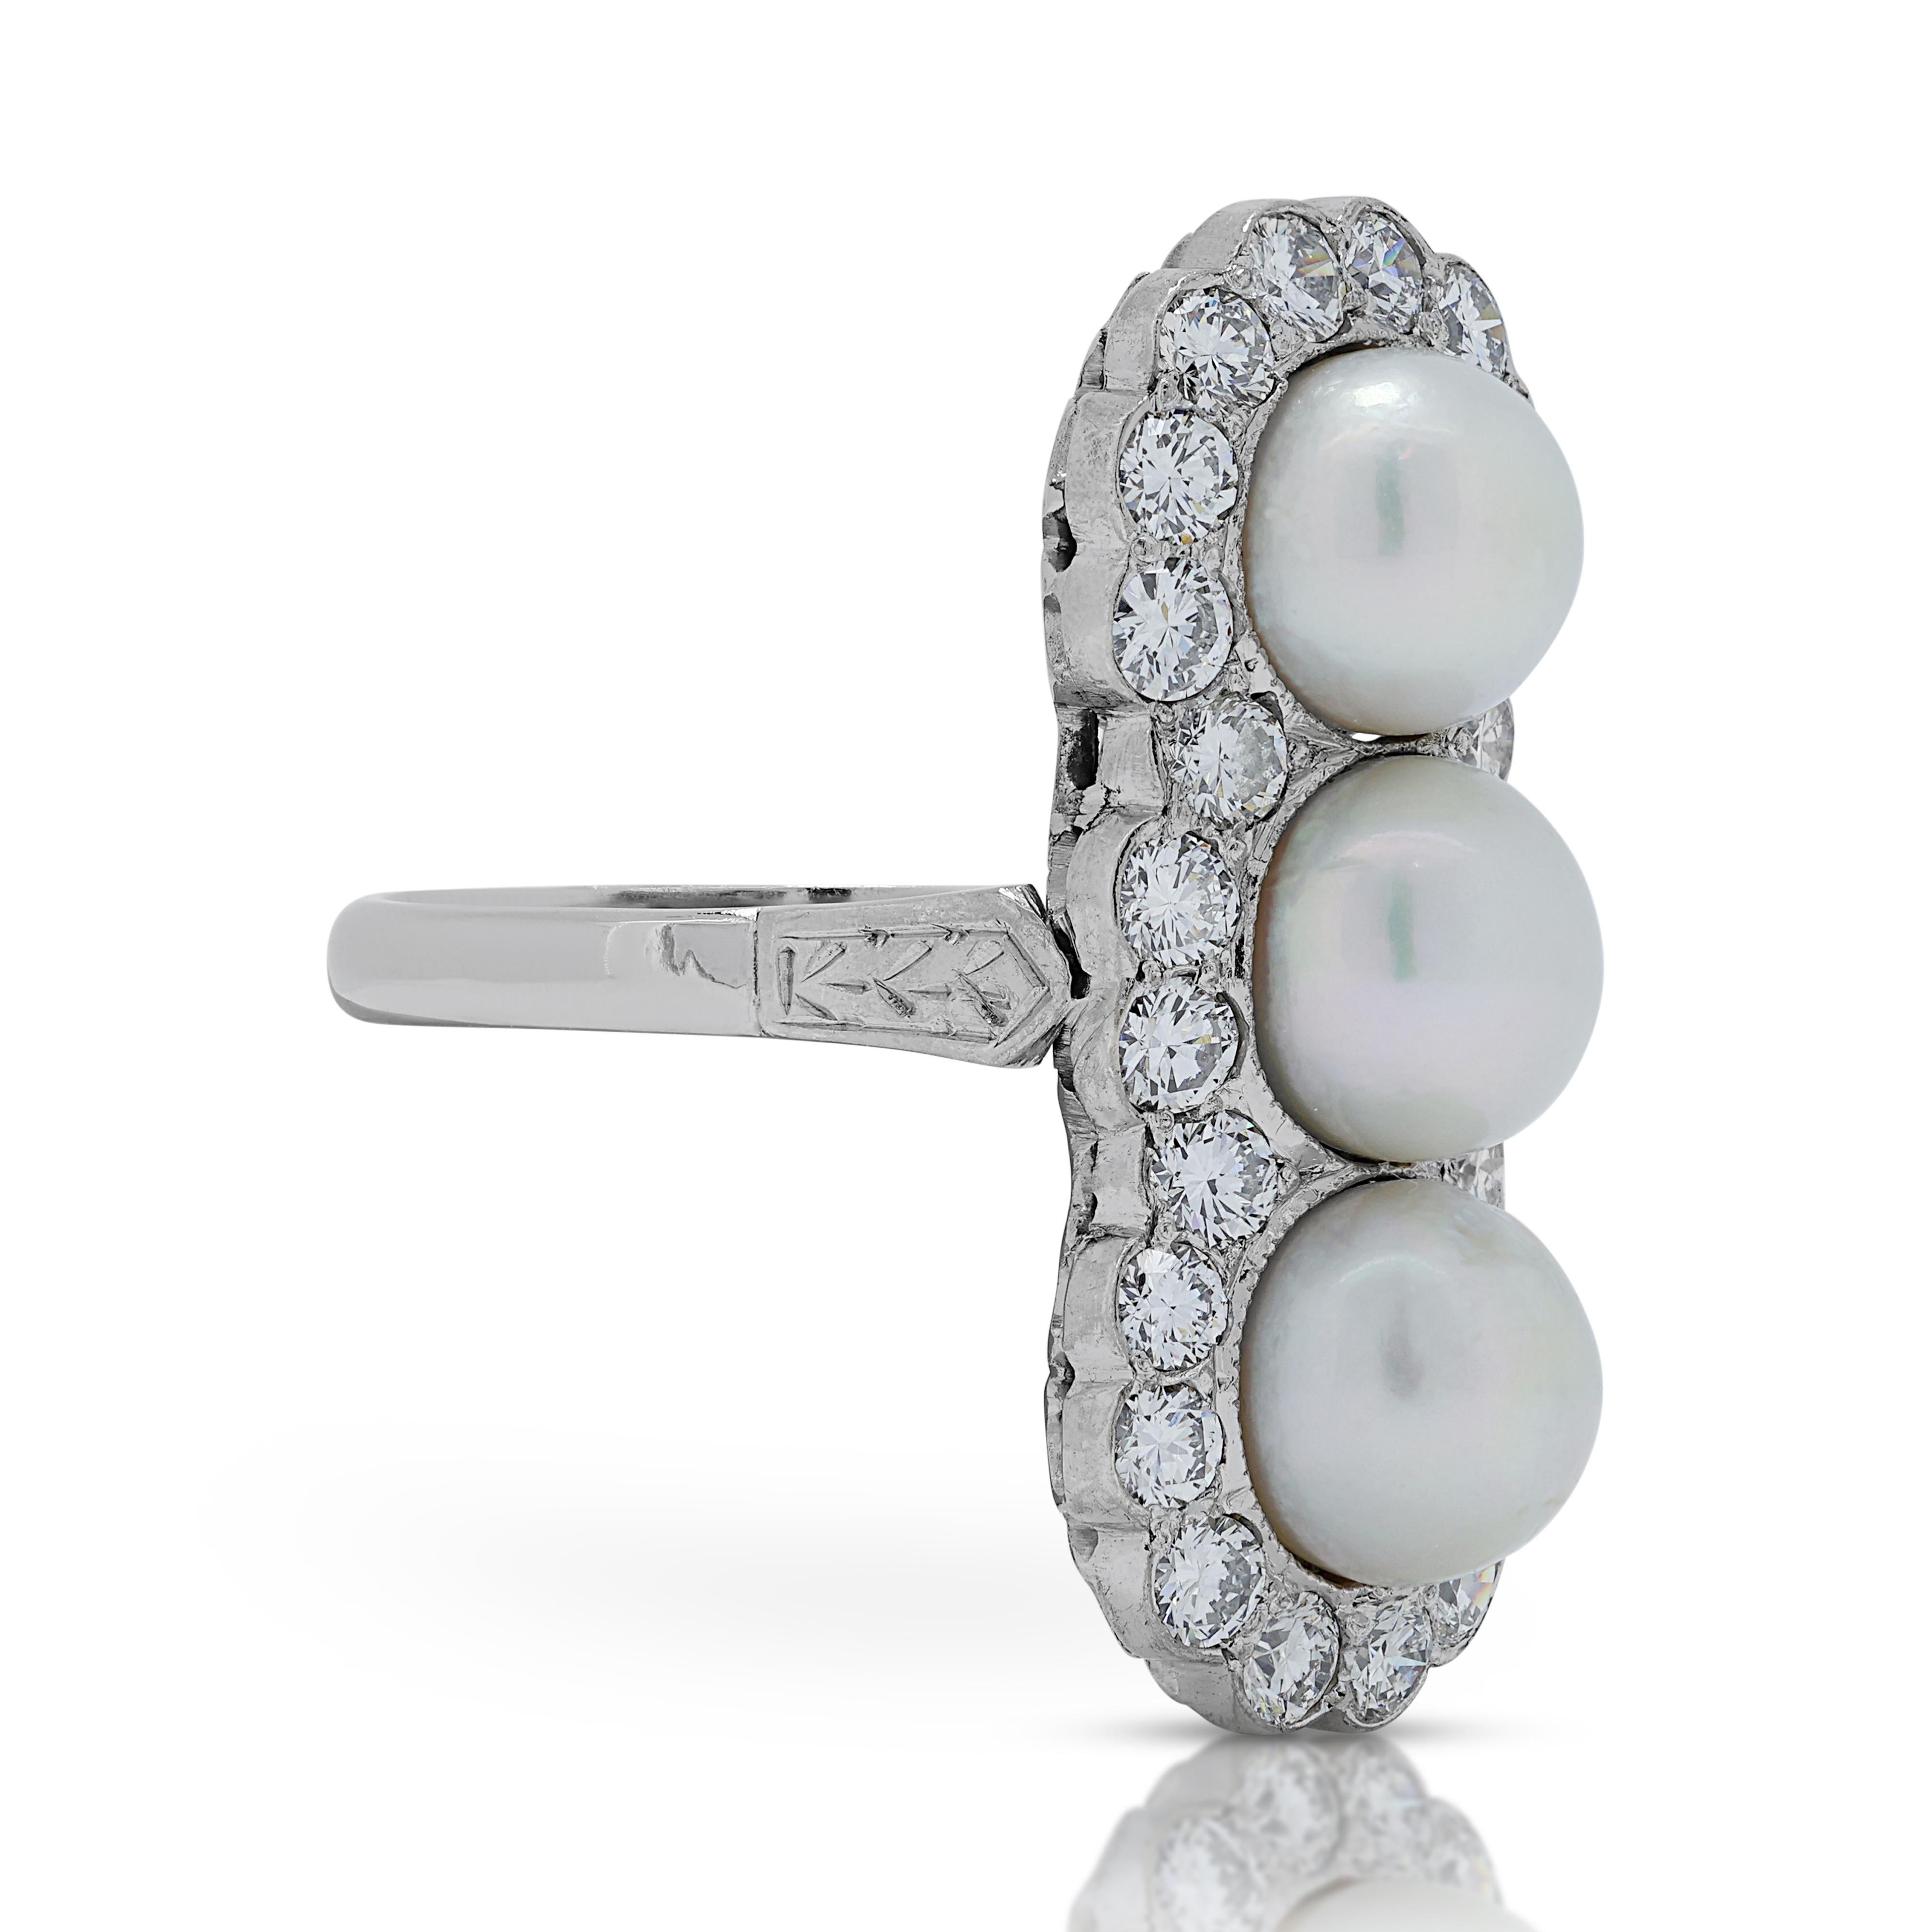 Women's 1.25ct Diamonds Ring with Pearls Set in Platinum For Sale